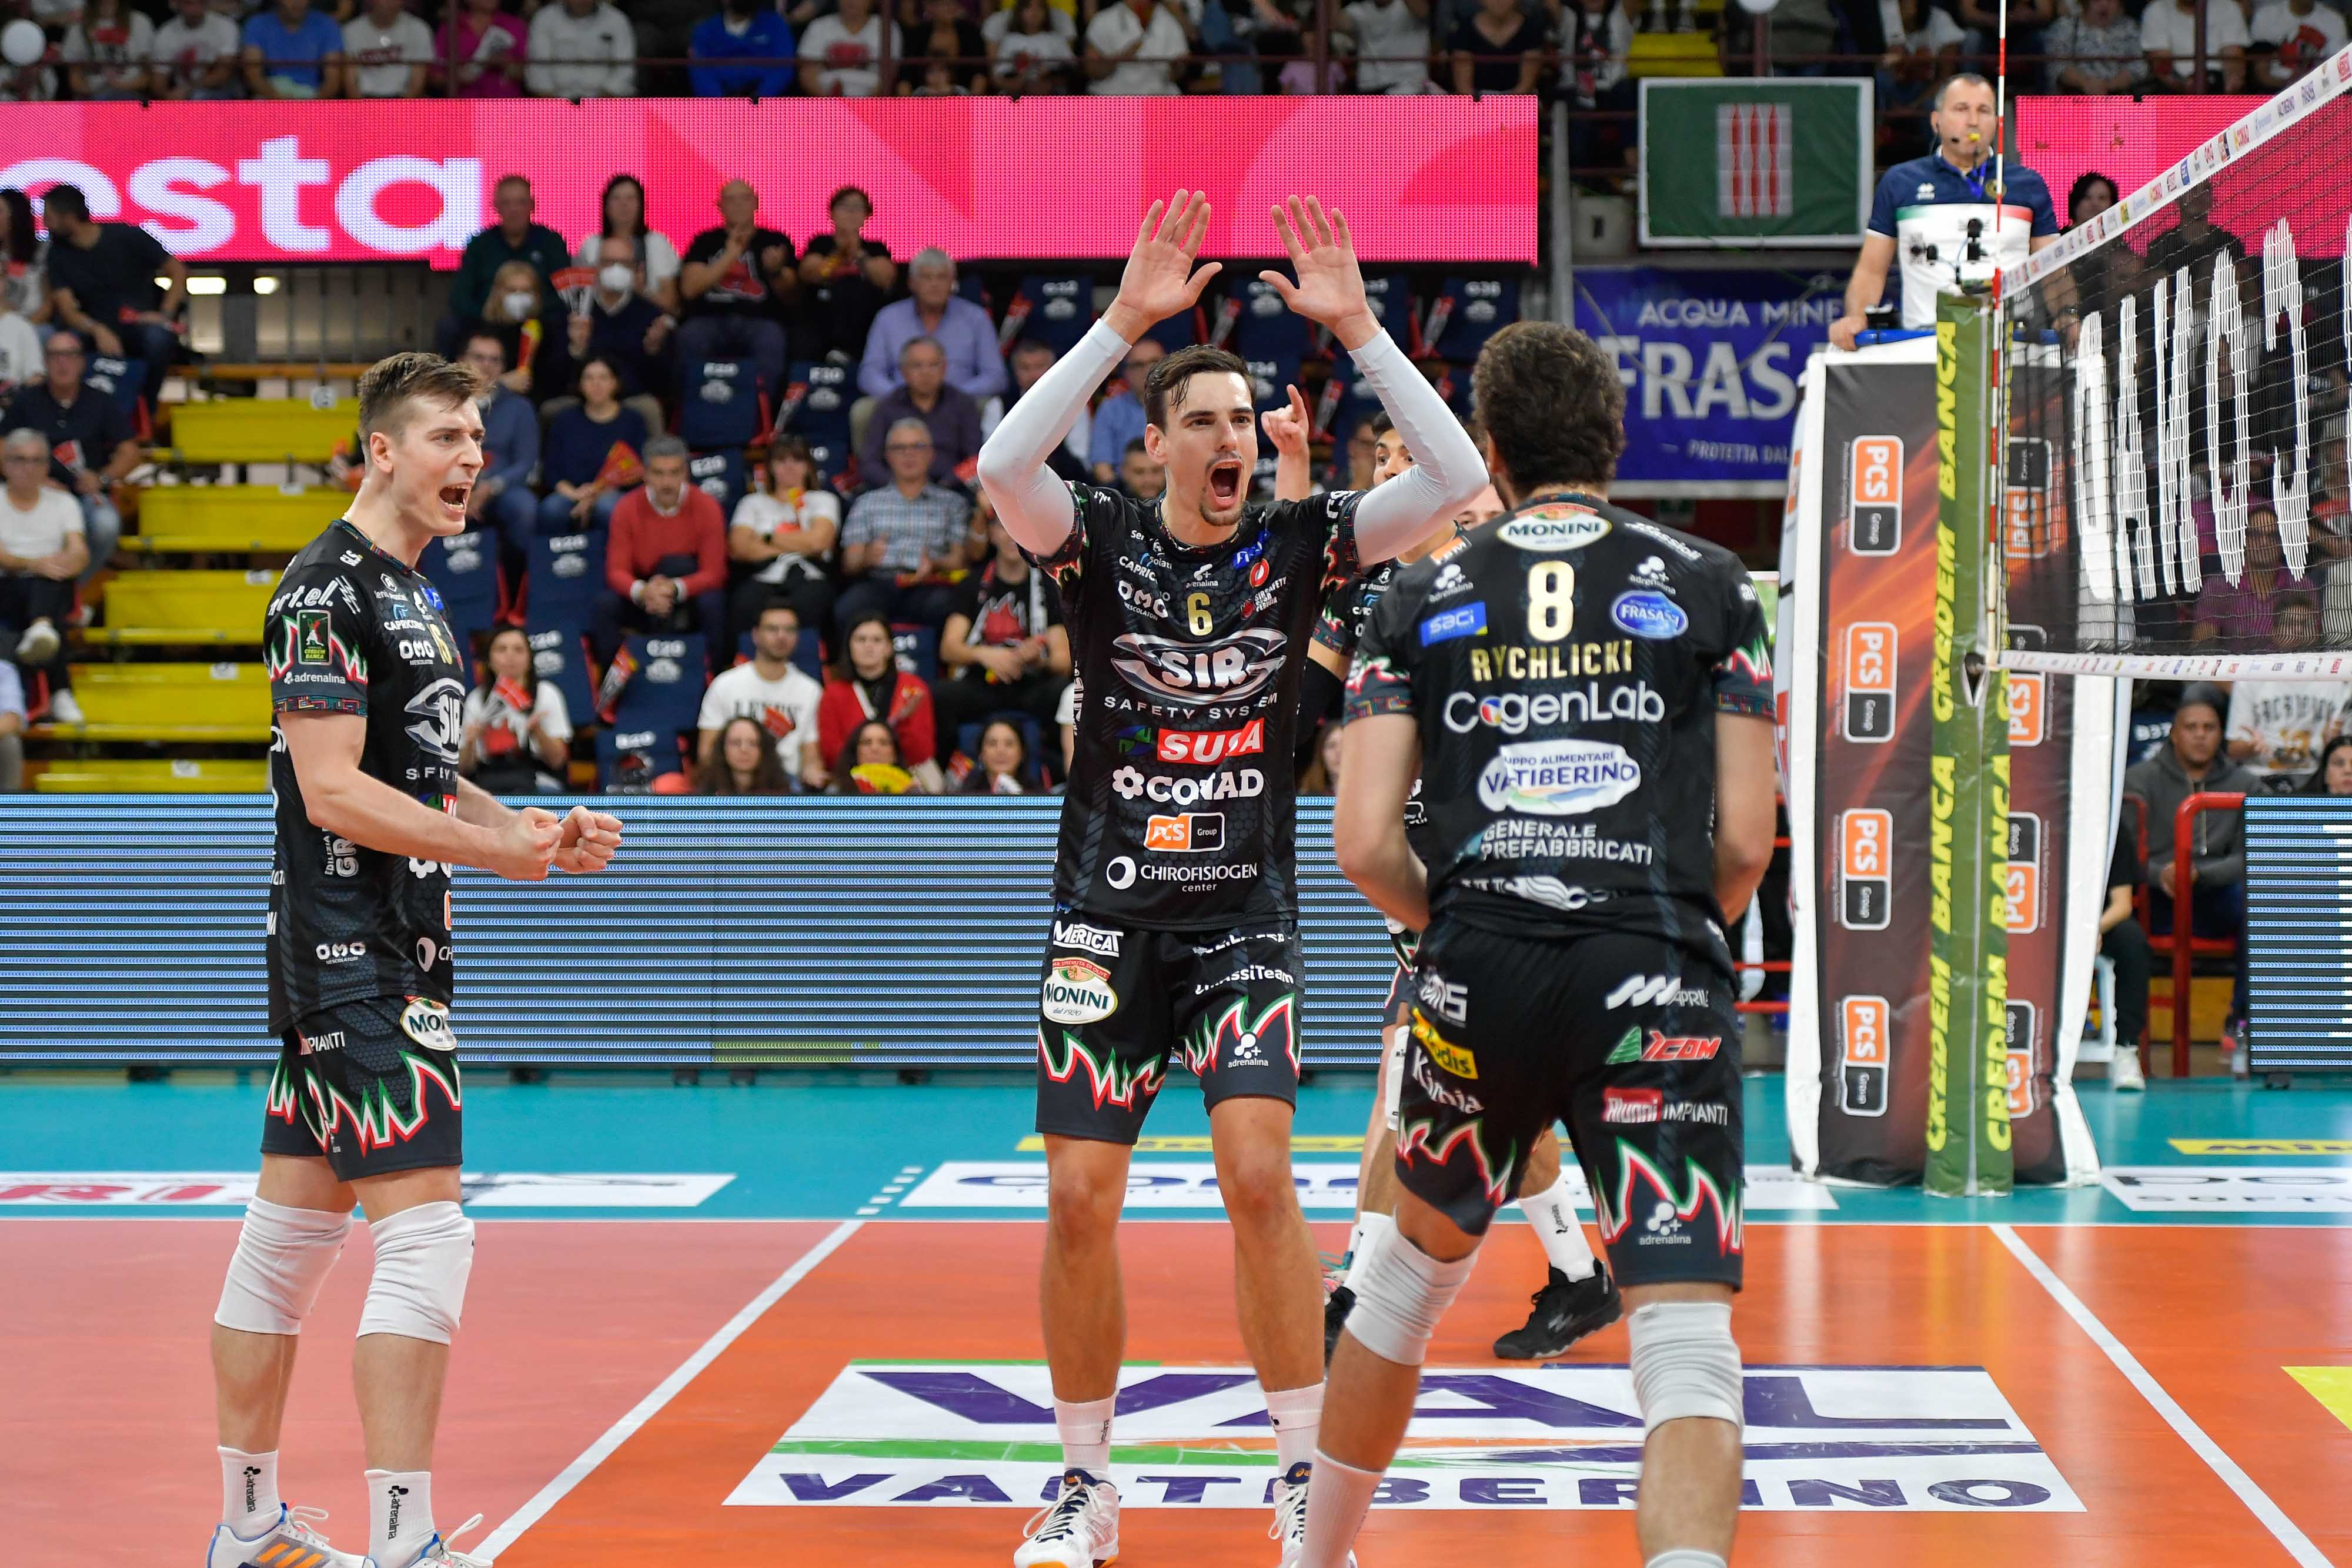 Giannelli-led Perugia victorious on SuperLegas opening weekend volleyballworld